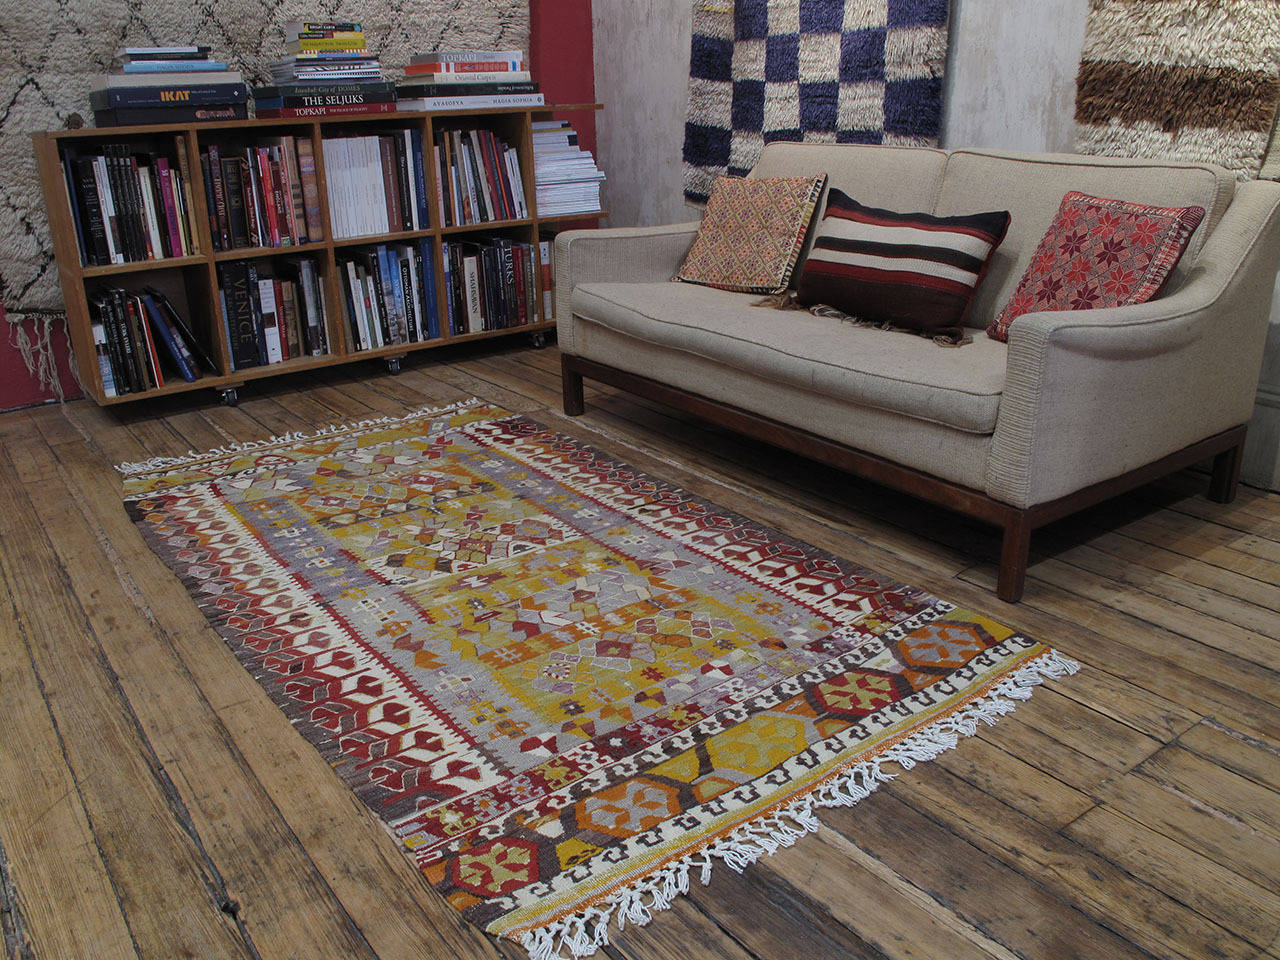 A beautiful old tribal flat-weave from Western Turkey in small format. Using characteristic motifs of her tribe, the weaver created a unique composition, full of whimsical details. The soft color palette adds to the charm. A great example of